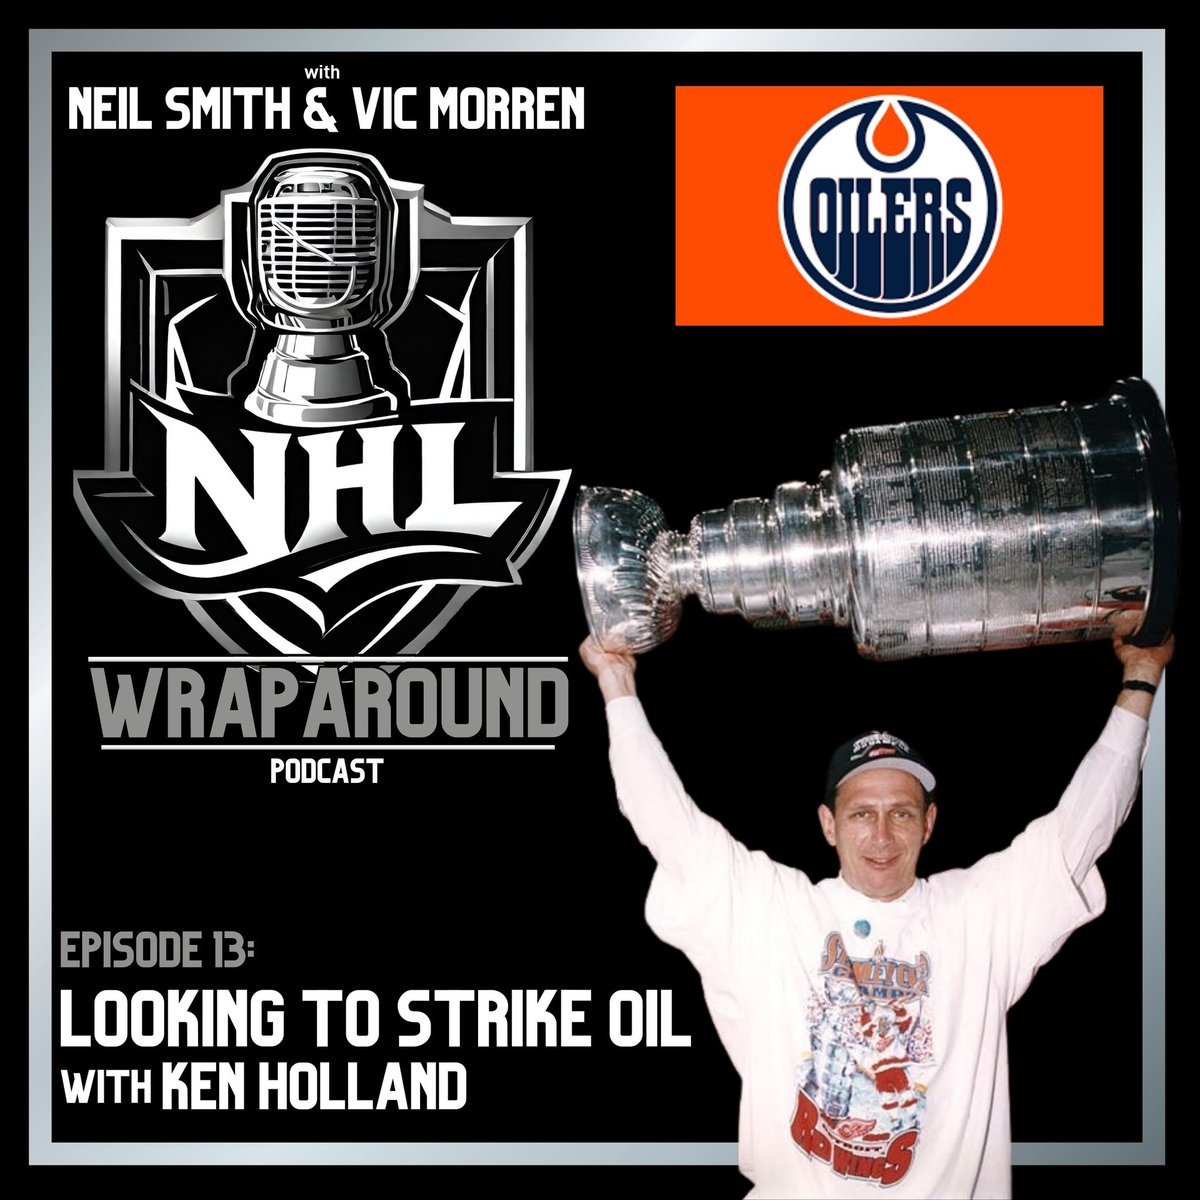 Today #LetsGoOilers Pres/GM Ken Holland joined #NHLWraparound podcast for some thoughts on the past, today and the playoffs. So much fun with my friend of 40 years!! #NHL @EdmontonOilers